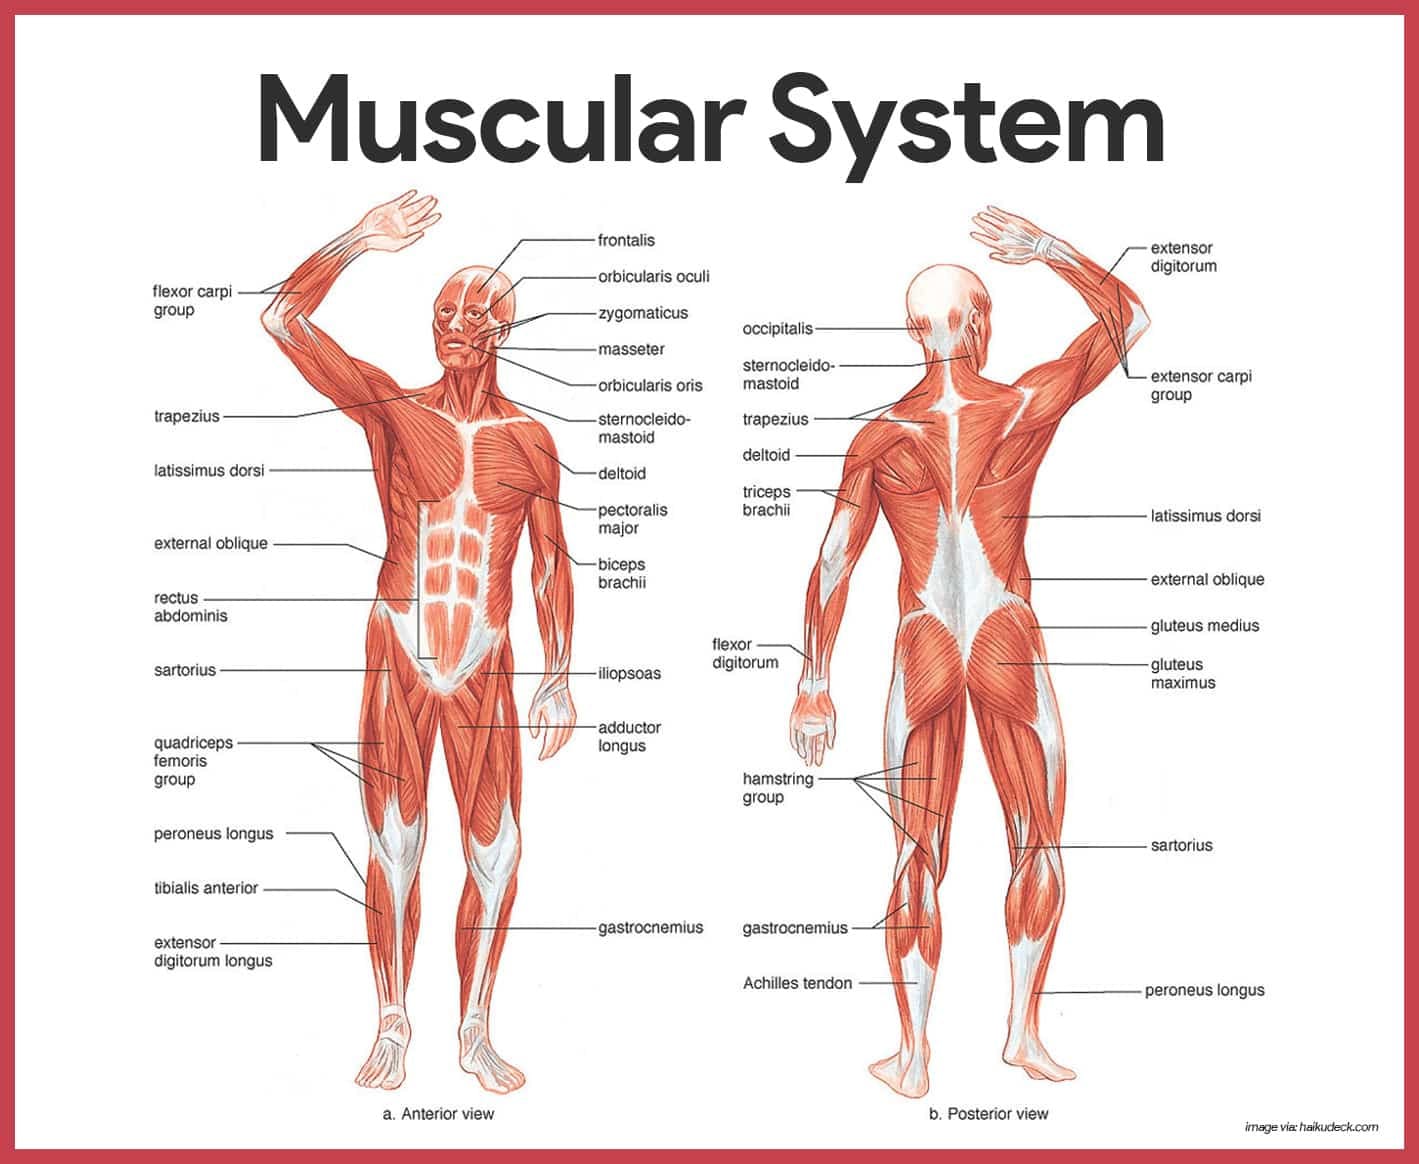 Muscular System Anatomy And Physiology  Nurseslabs